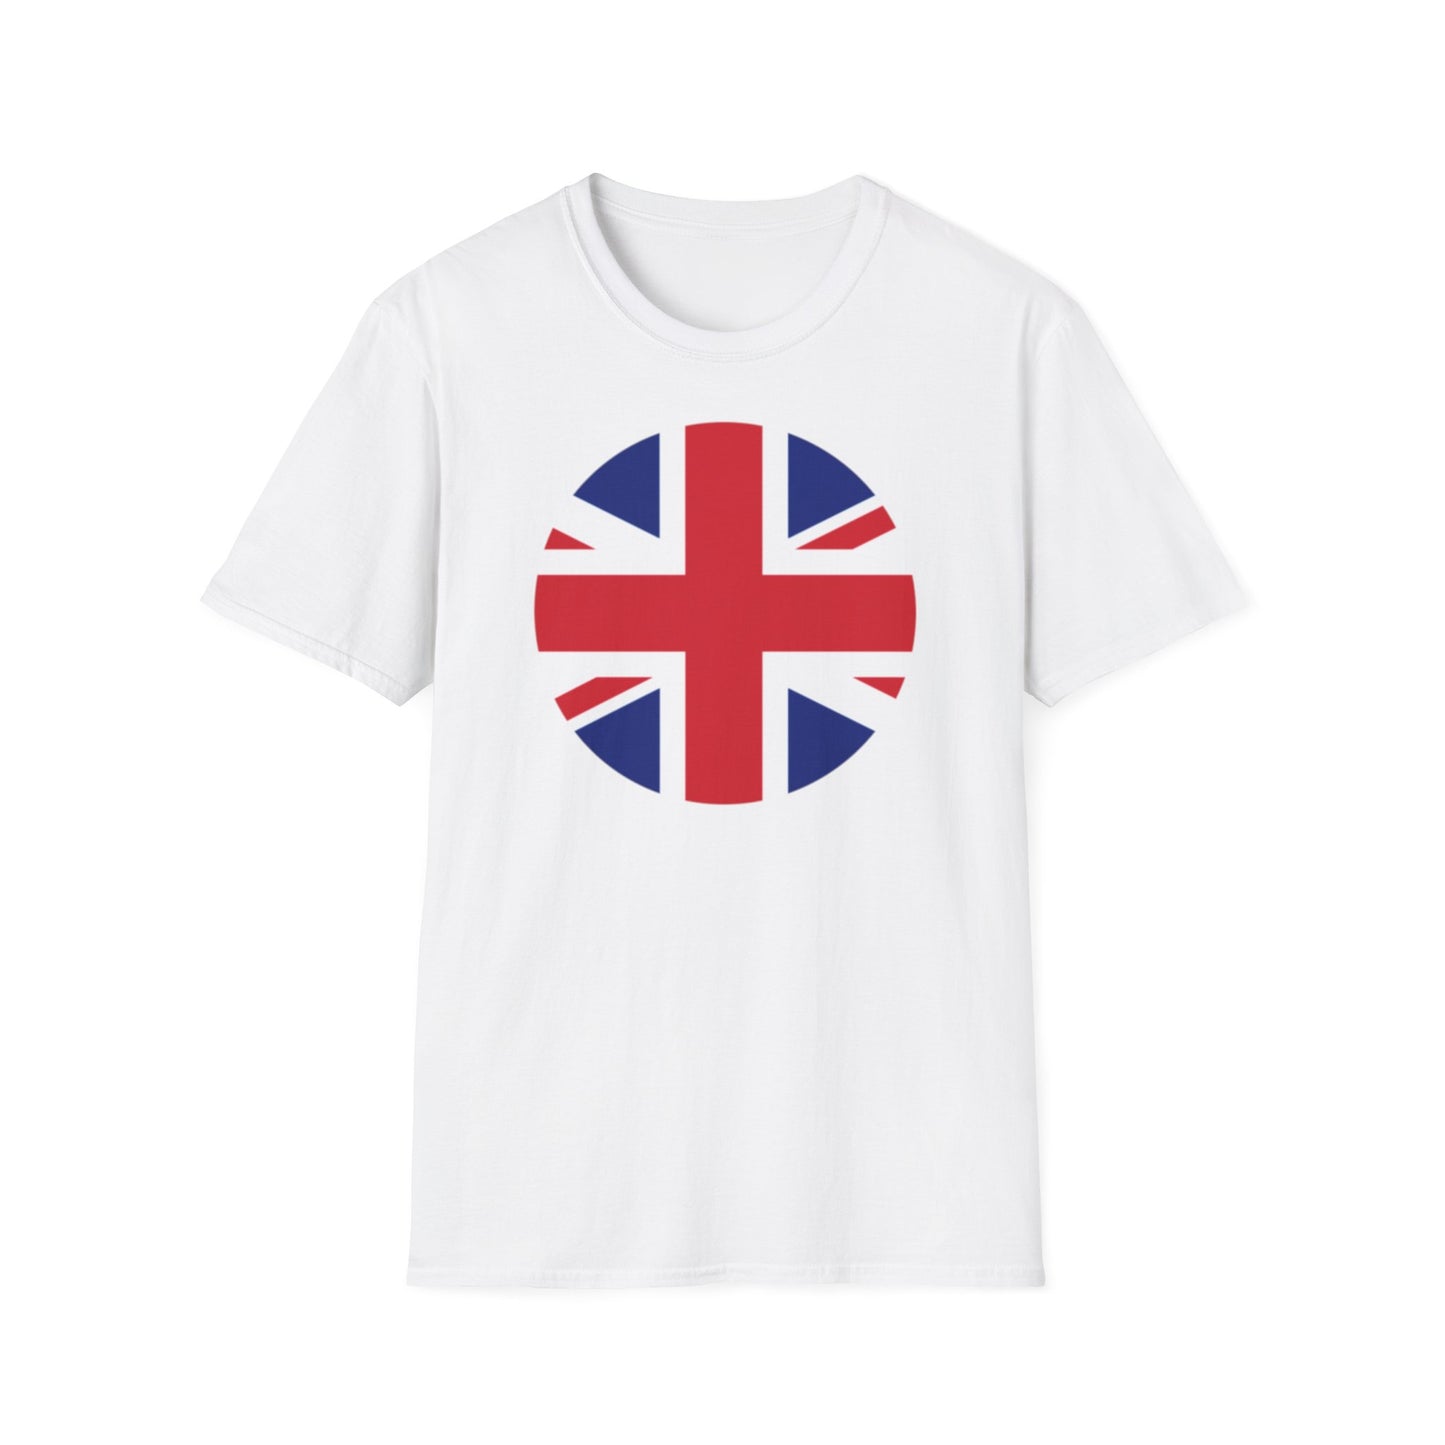 A white t-shirt with a design of a Union Jack flag in a round circle shape